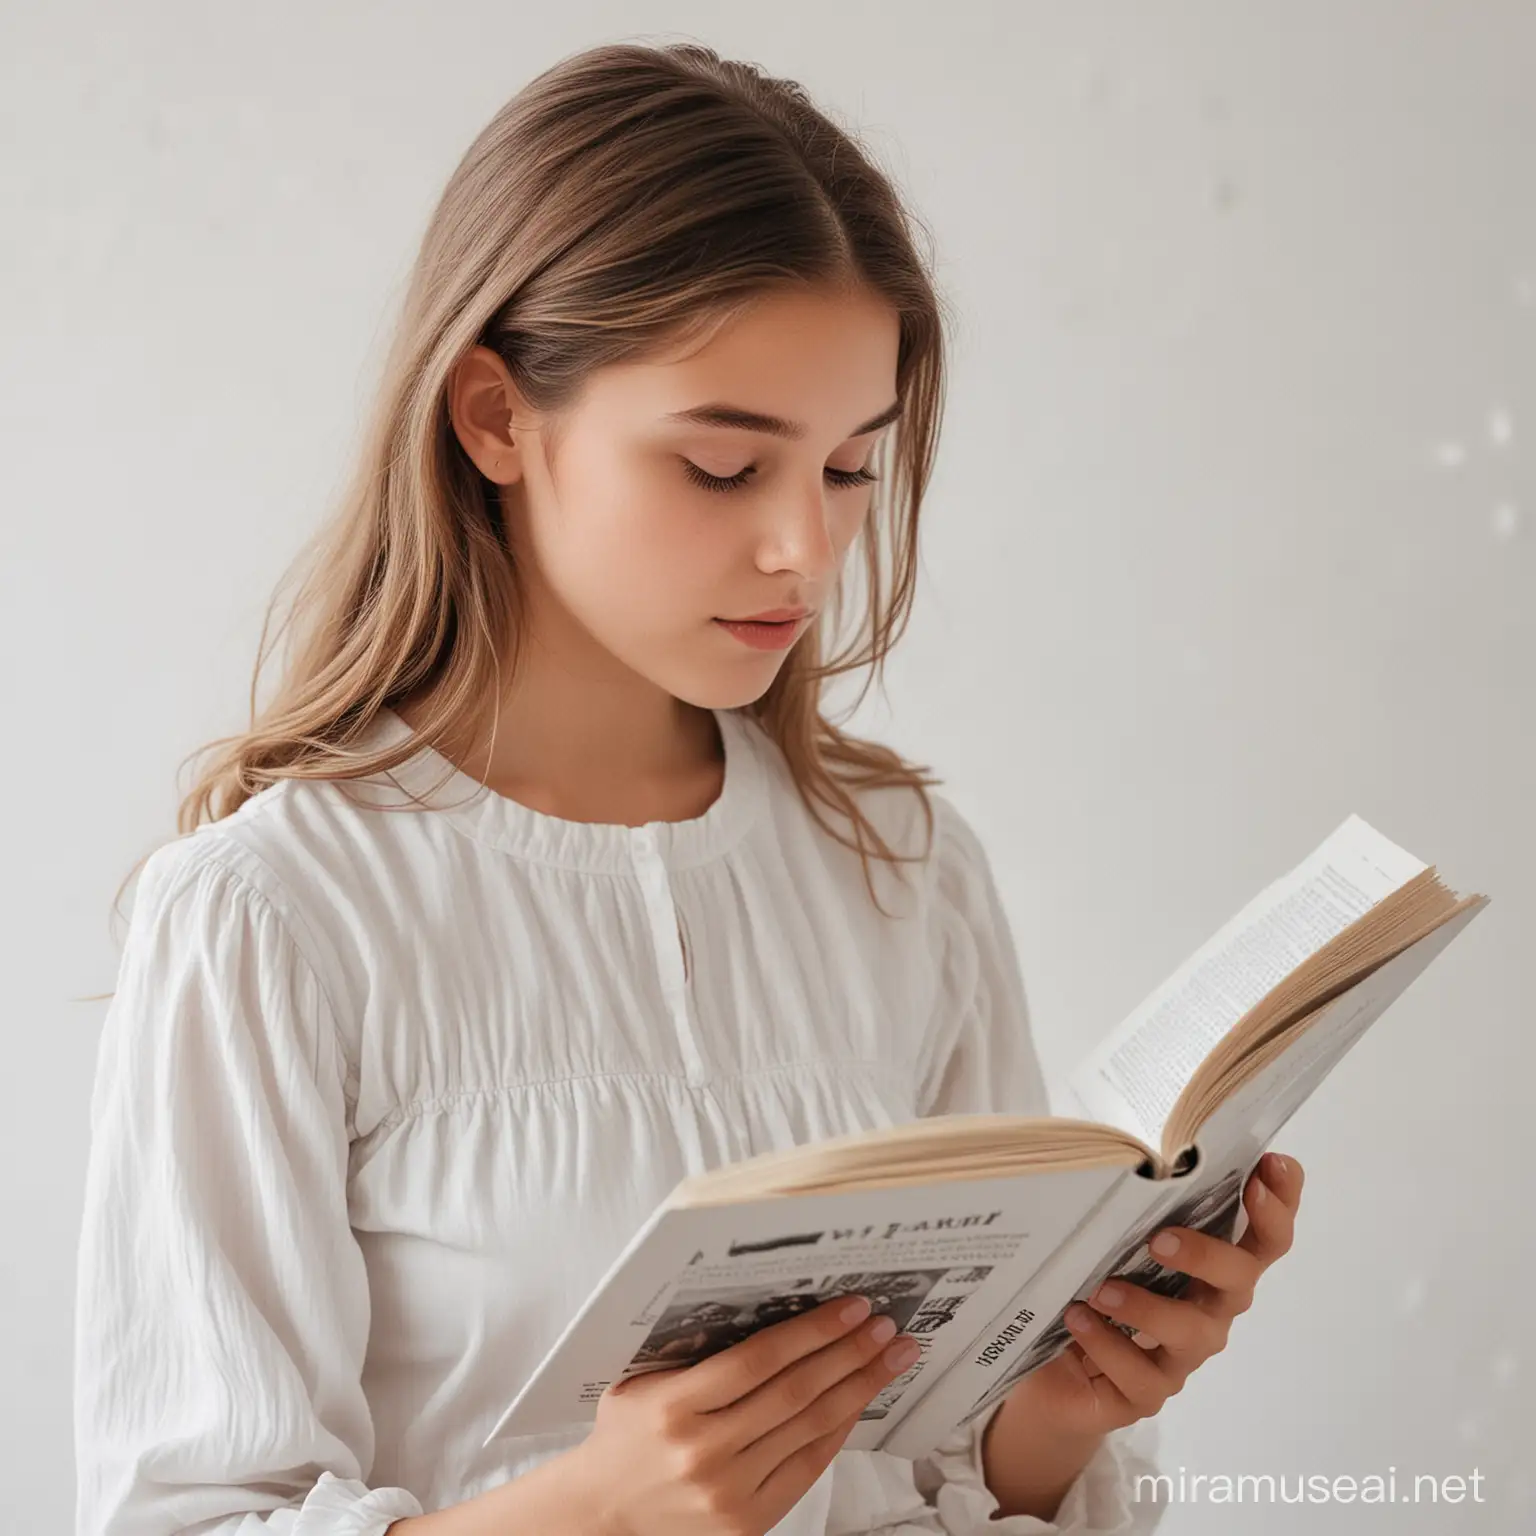 asthetic  picture from far of a  girl reading pictures story book with a good background all in white 